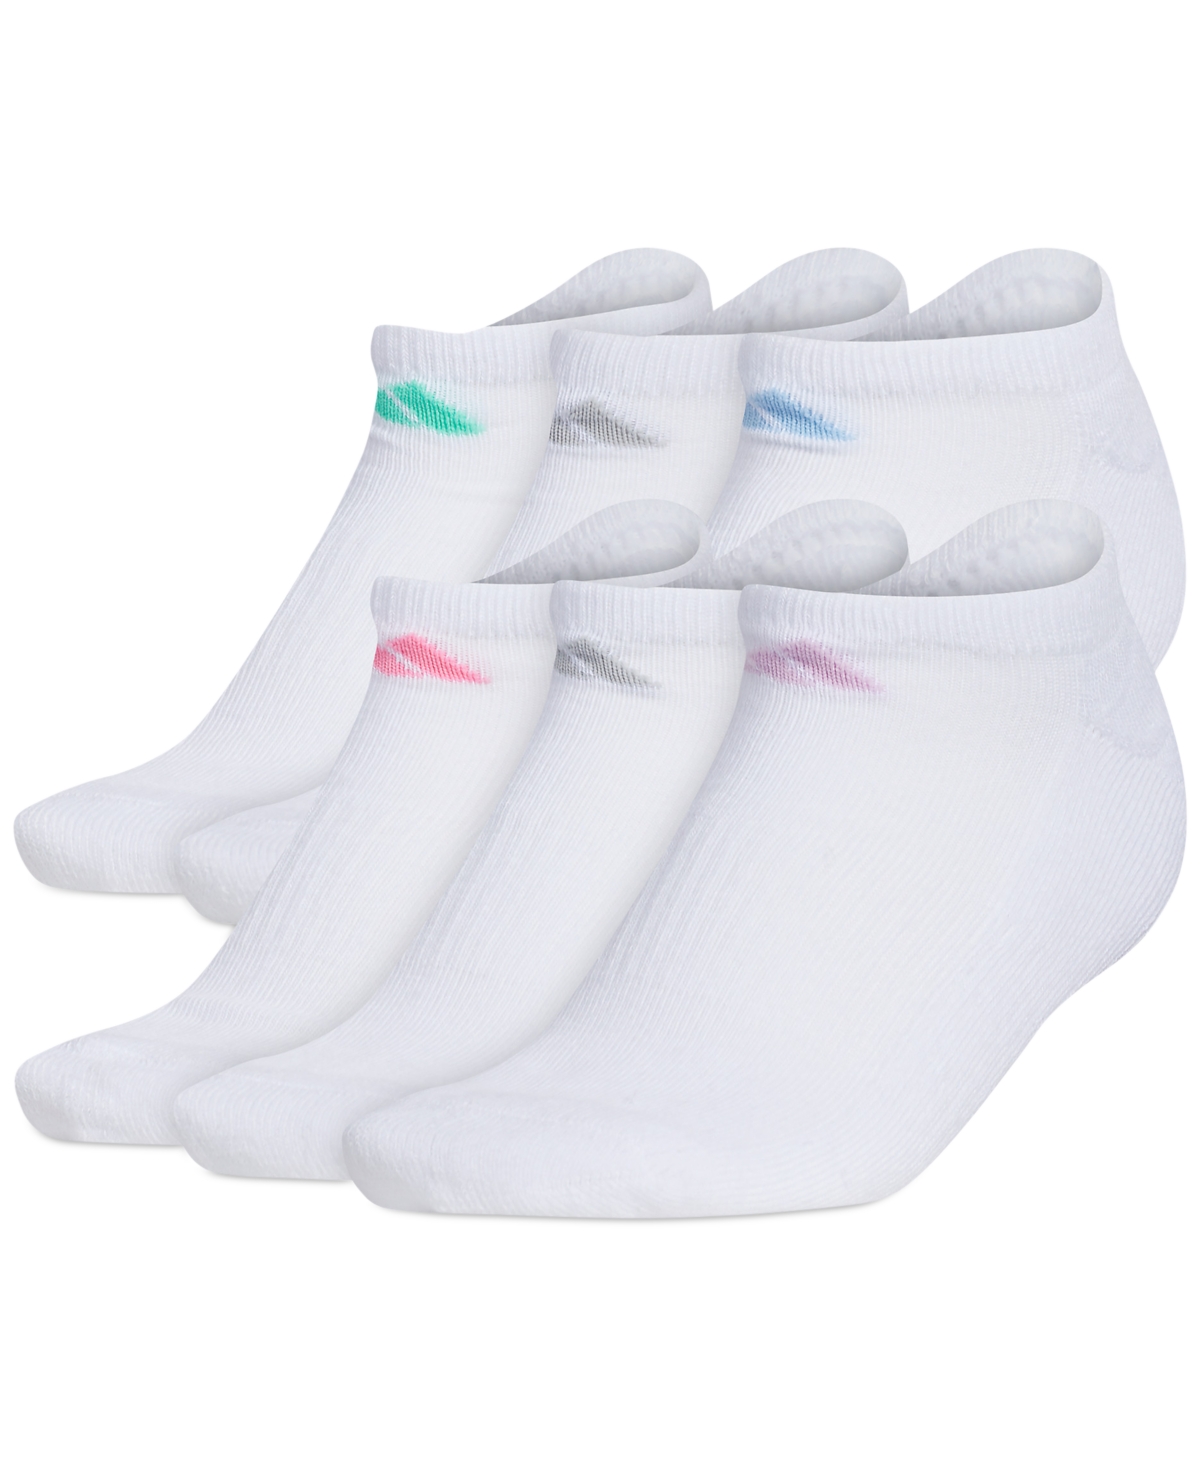 Women's 6-Pk. Athletic Cushioned No-Show Socks - White/clear Sky Blue/bliss Lilac Purple